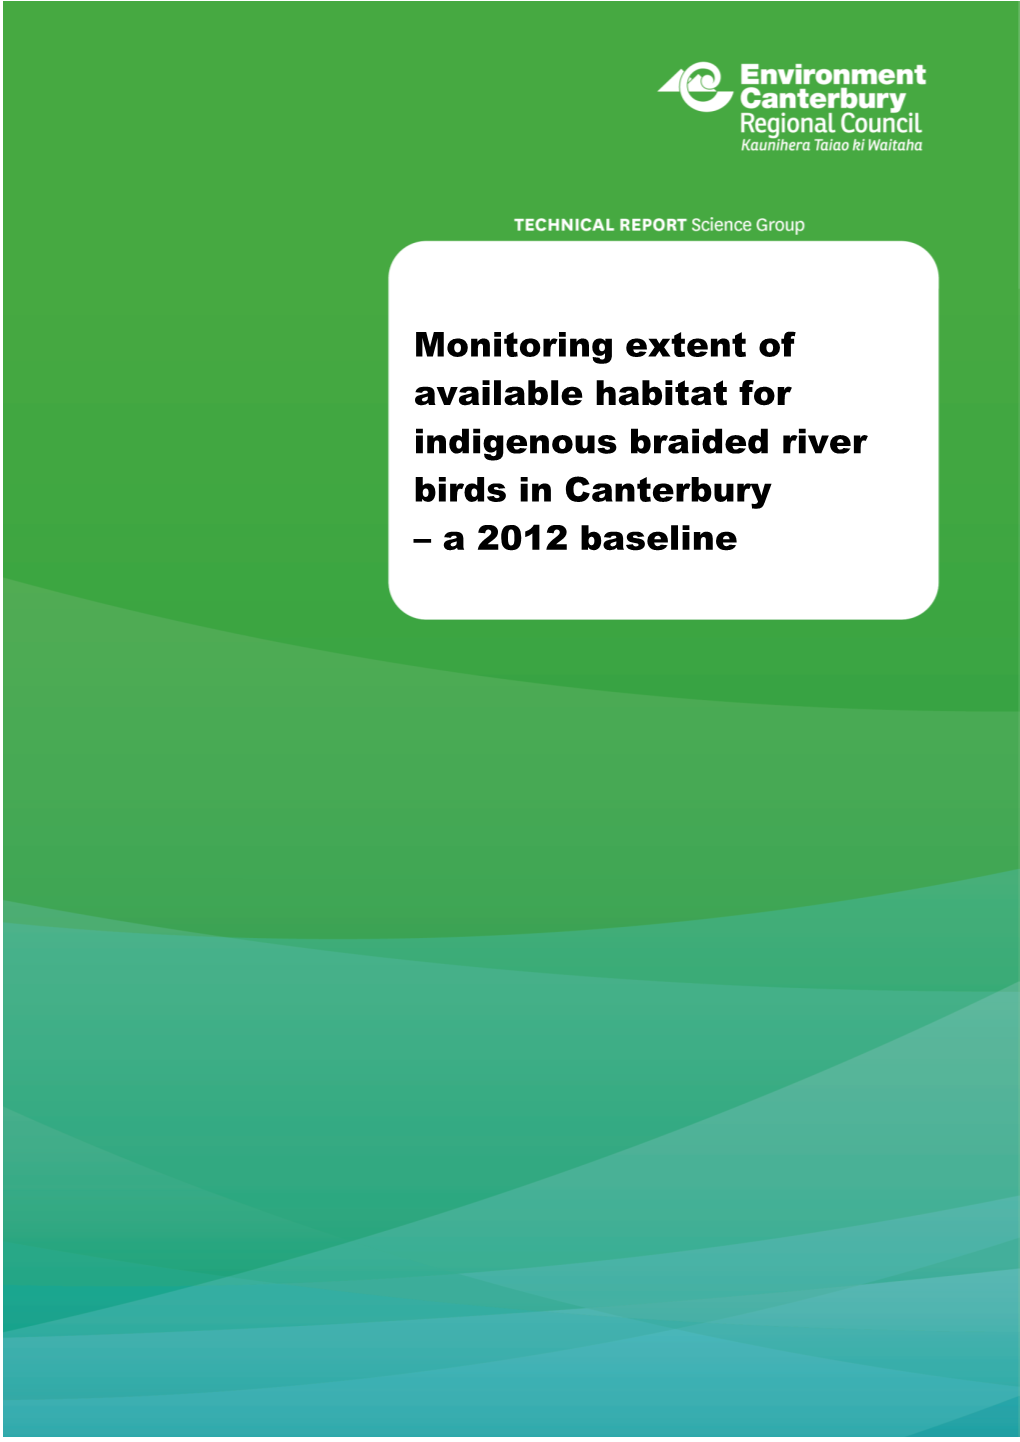 Monitoring Extent of Available Habitat for Indigenous Braided River Birds in Canterbury – a 2012 Baseline